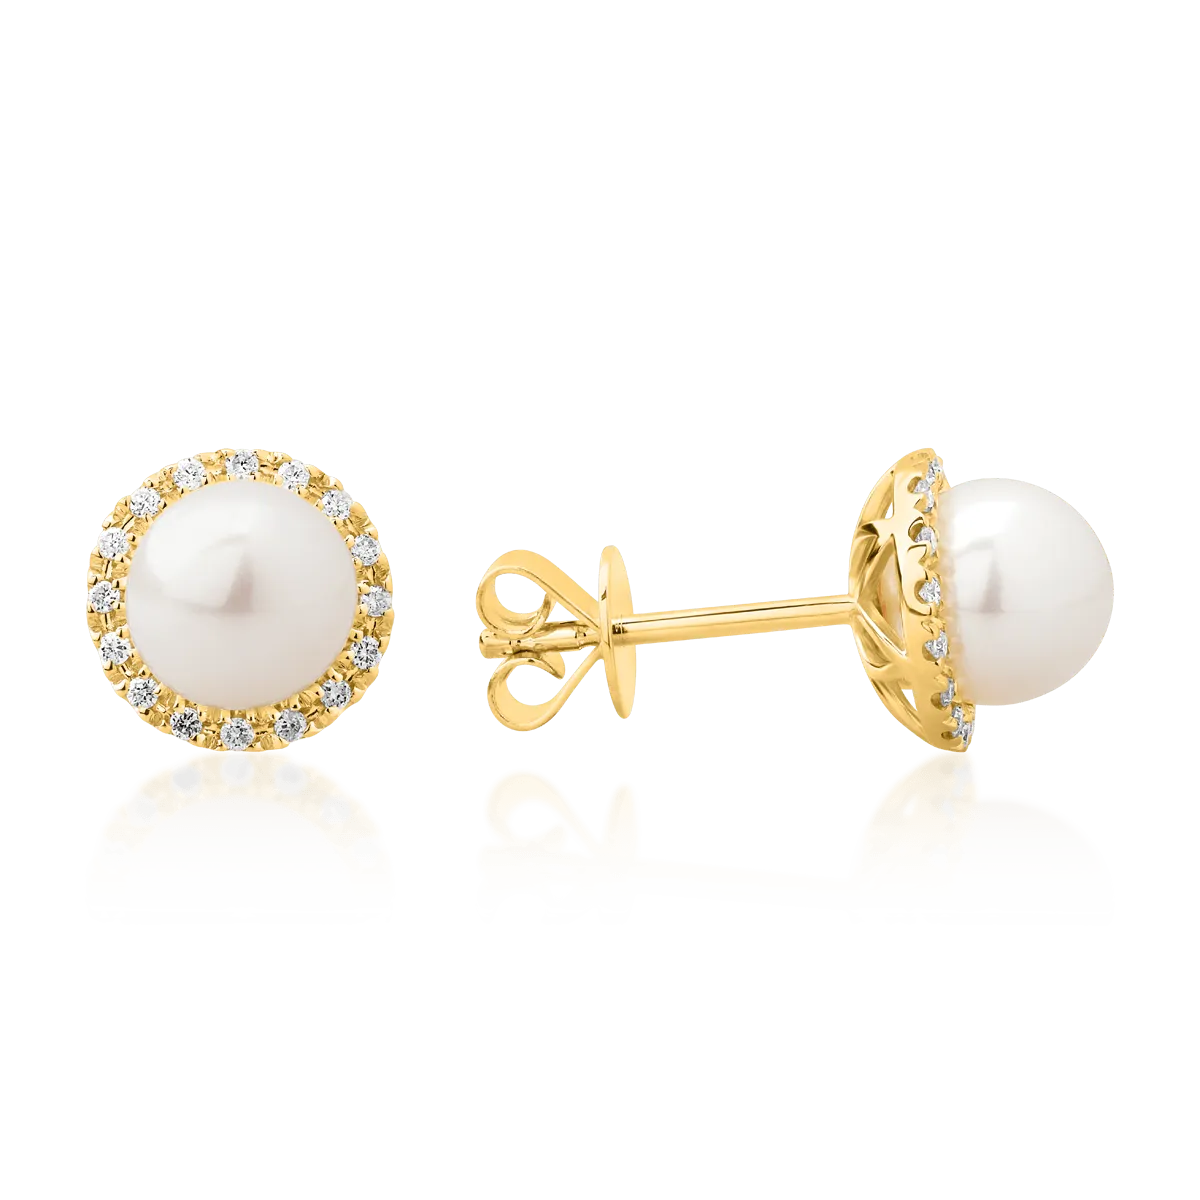 14K yellow gold earrings with 2ct fresh water pearls and 0.11ct diamonds